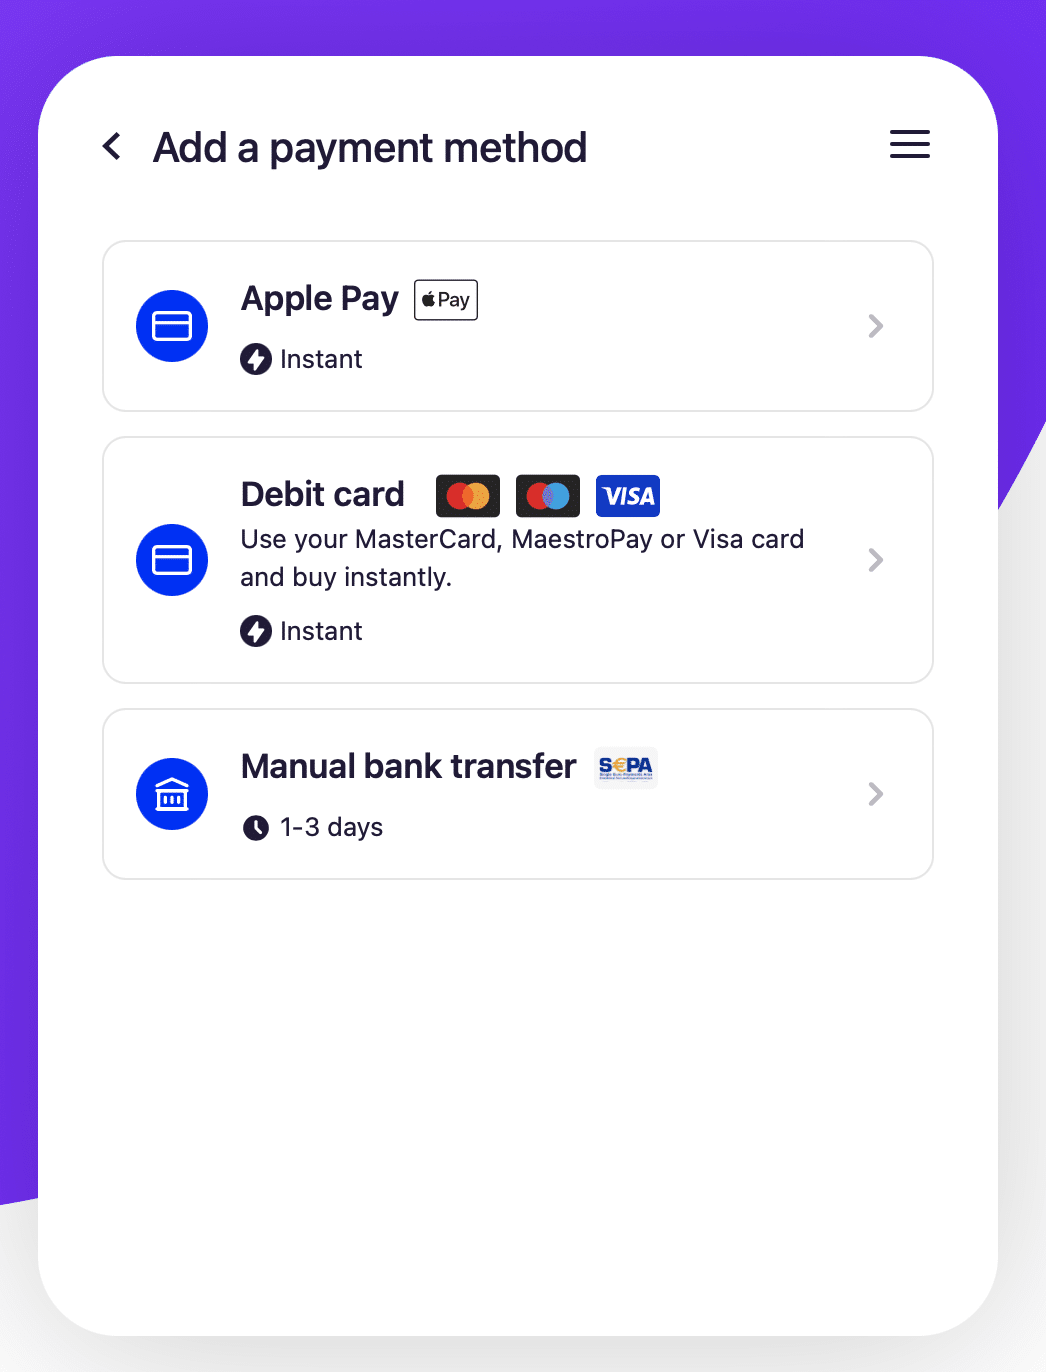 The payment methods available on MoonPay
